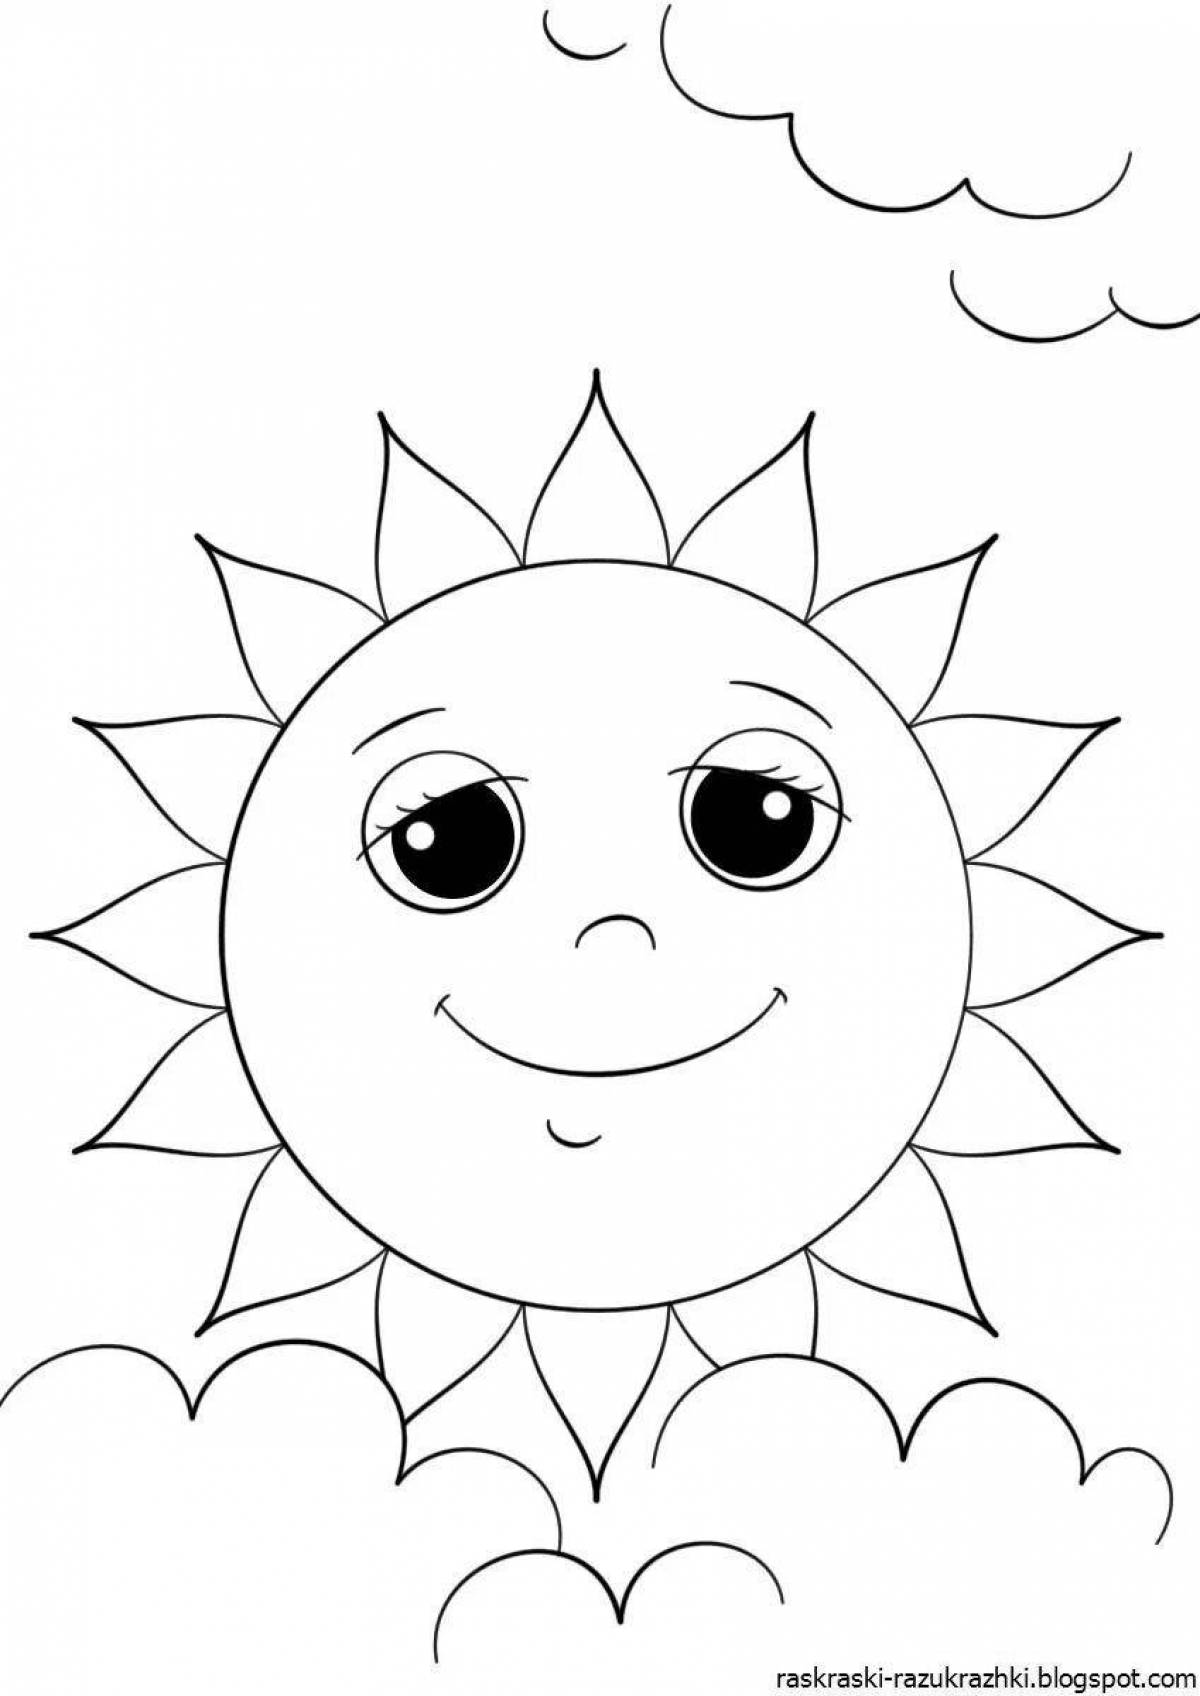 Great sun coloring book for 3-4 year olds